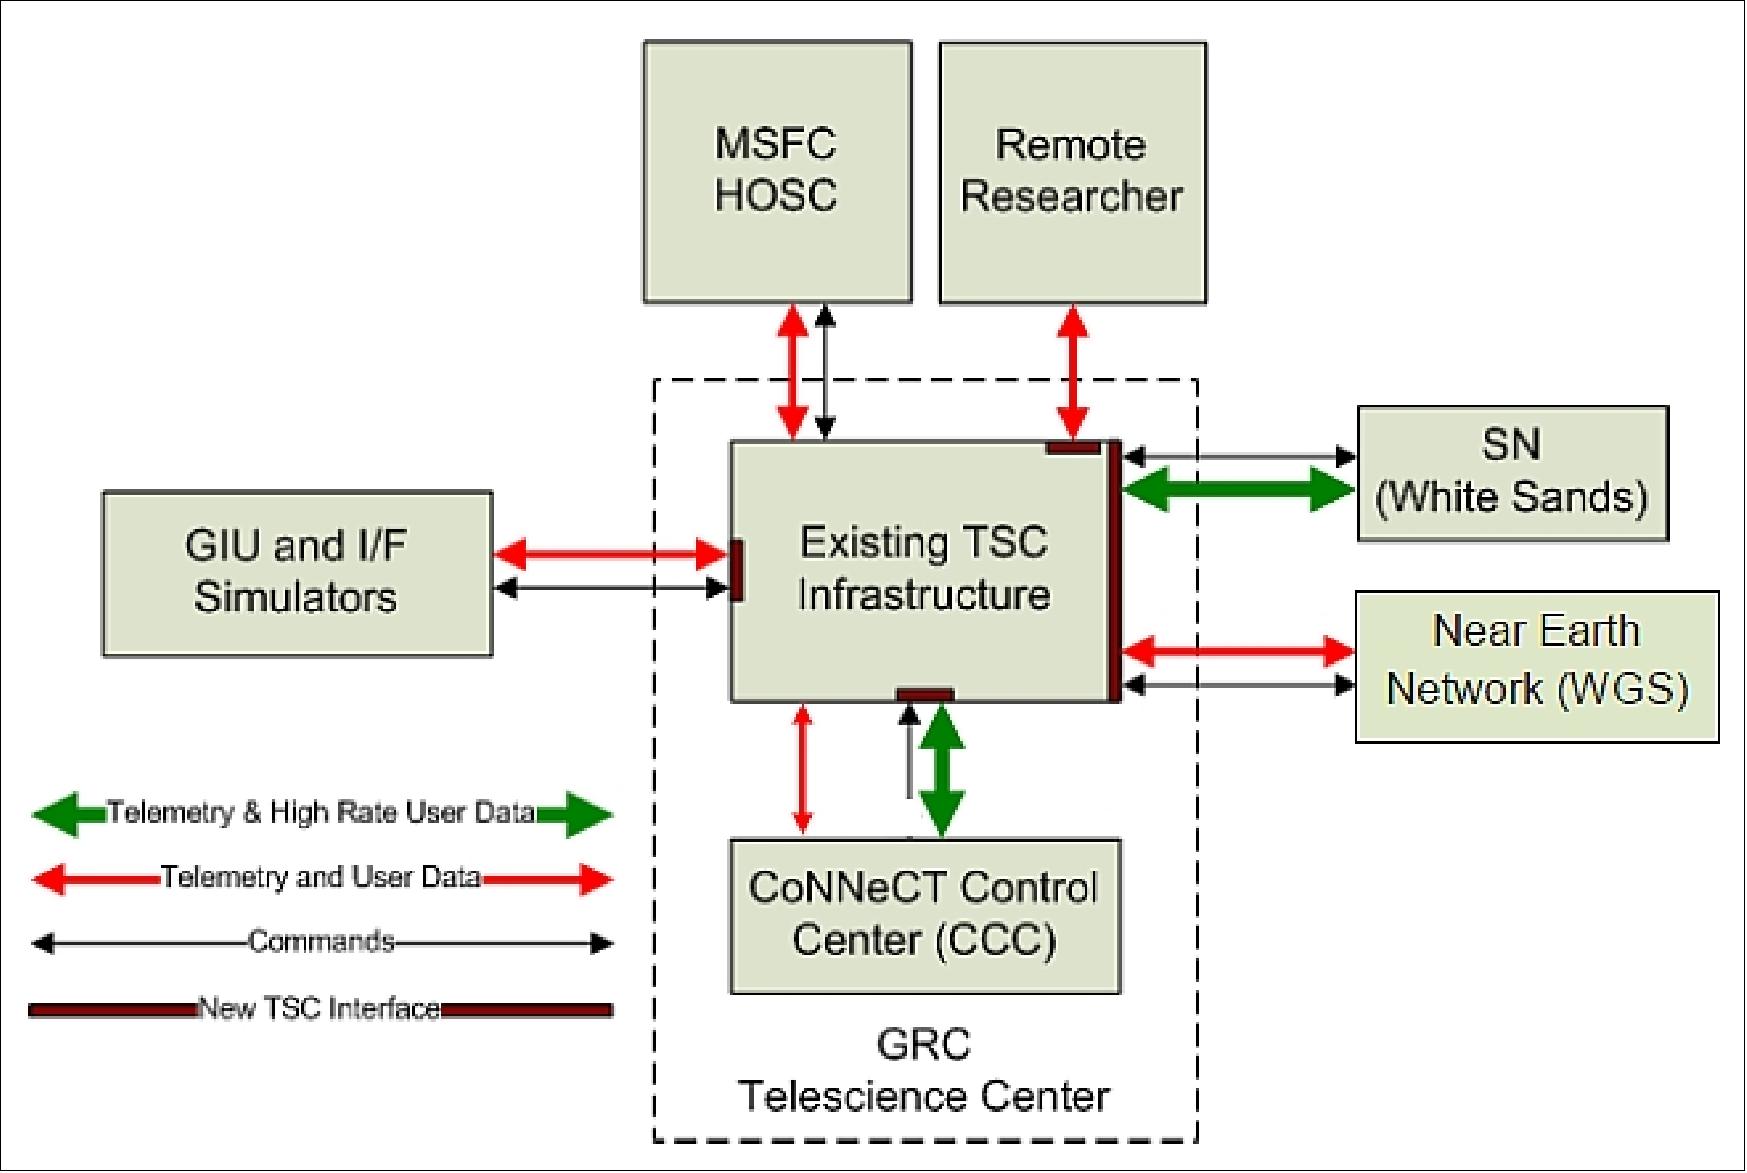 Figure 24: Functional diagram of the CCC (CoNNeCT Control Center), image credit: NASA